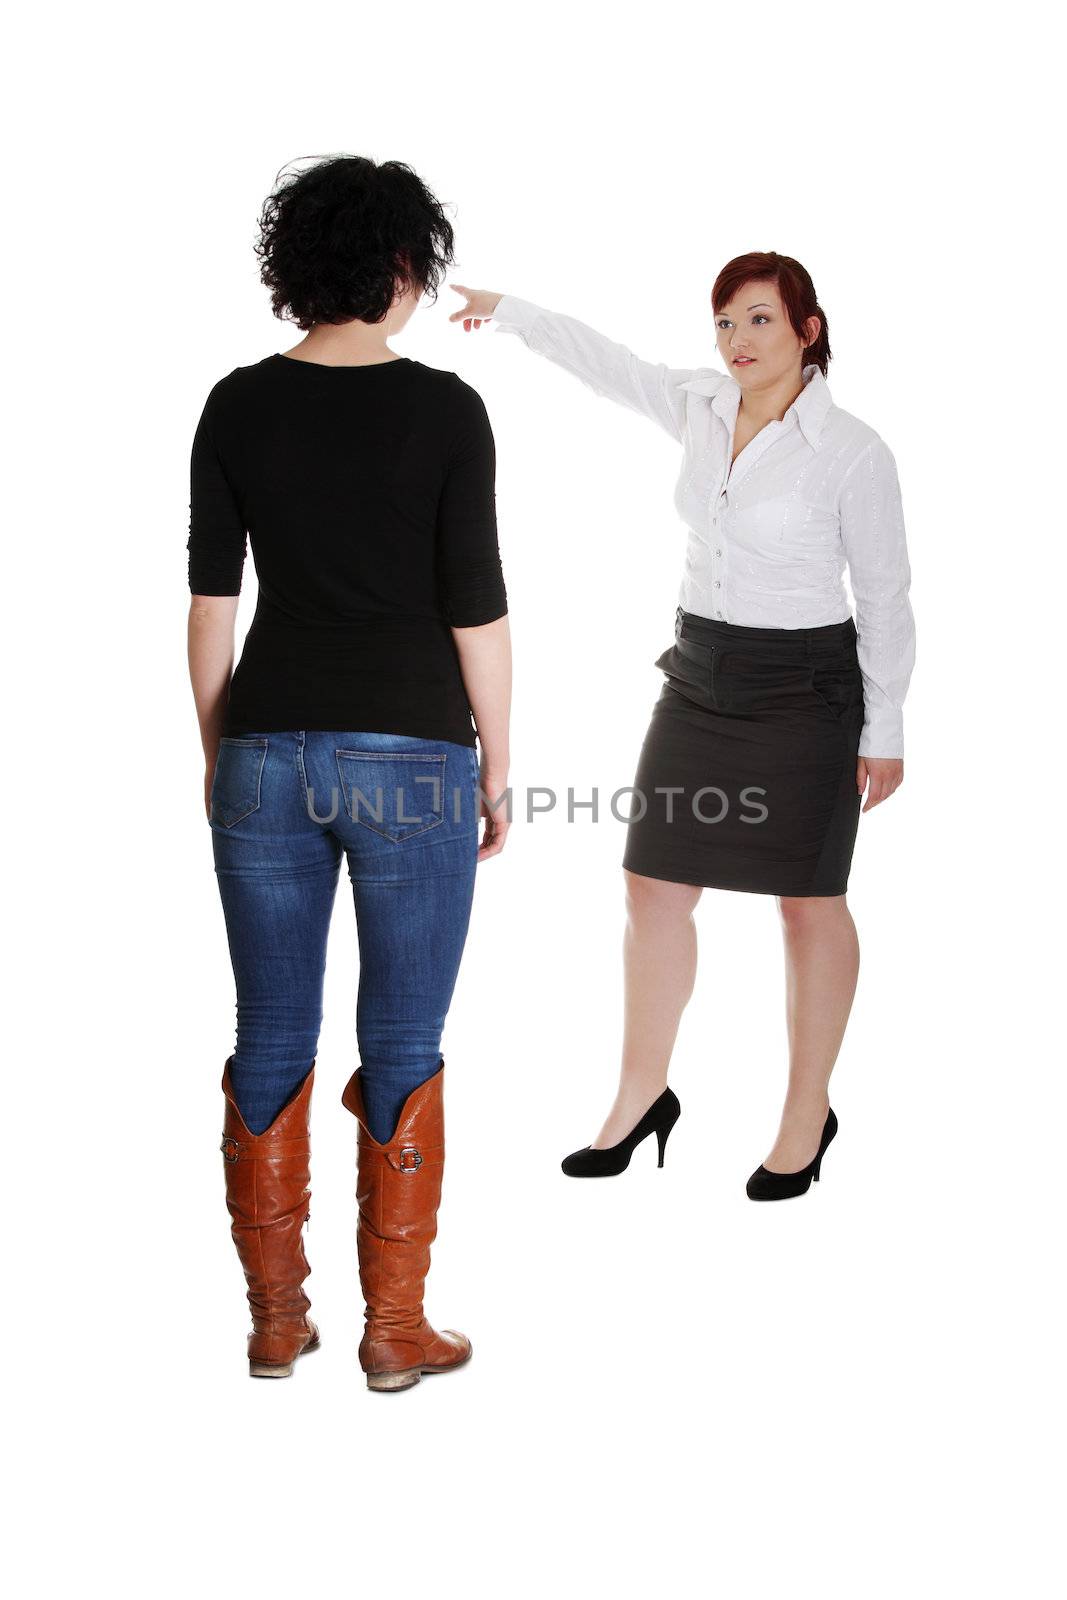 Businesswoman giving reprimand to worker. Isolated on white